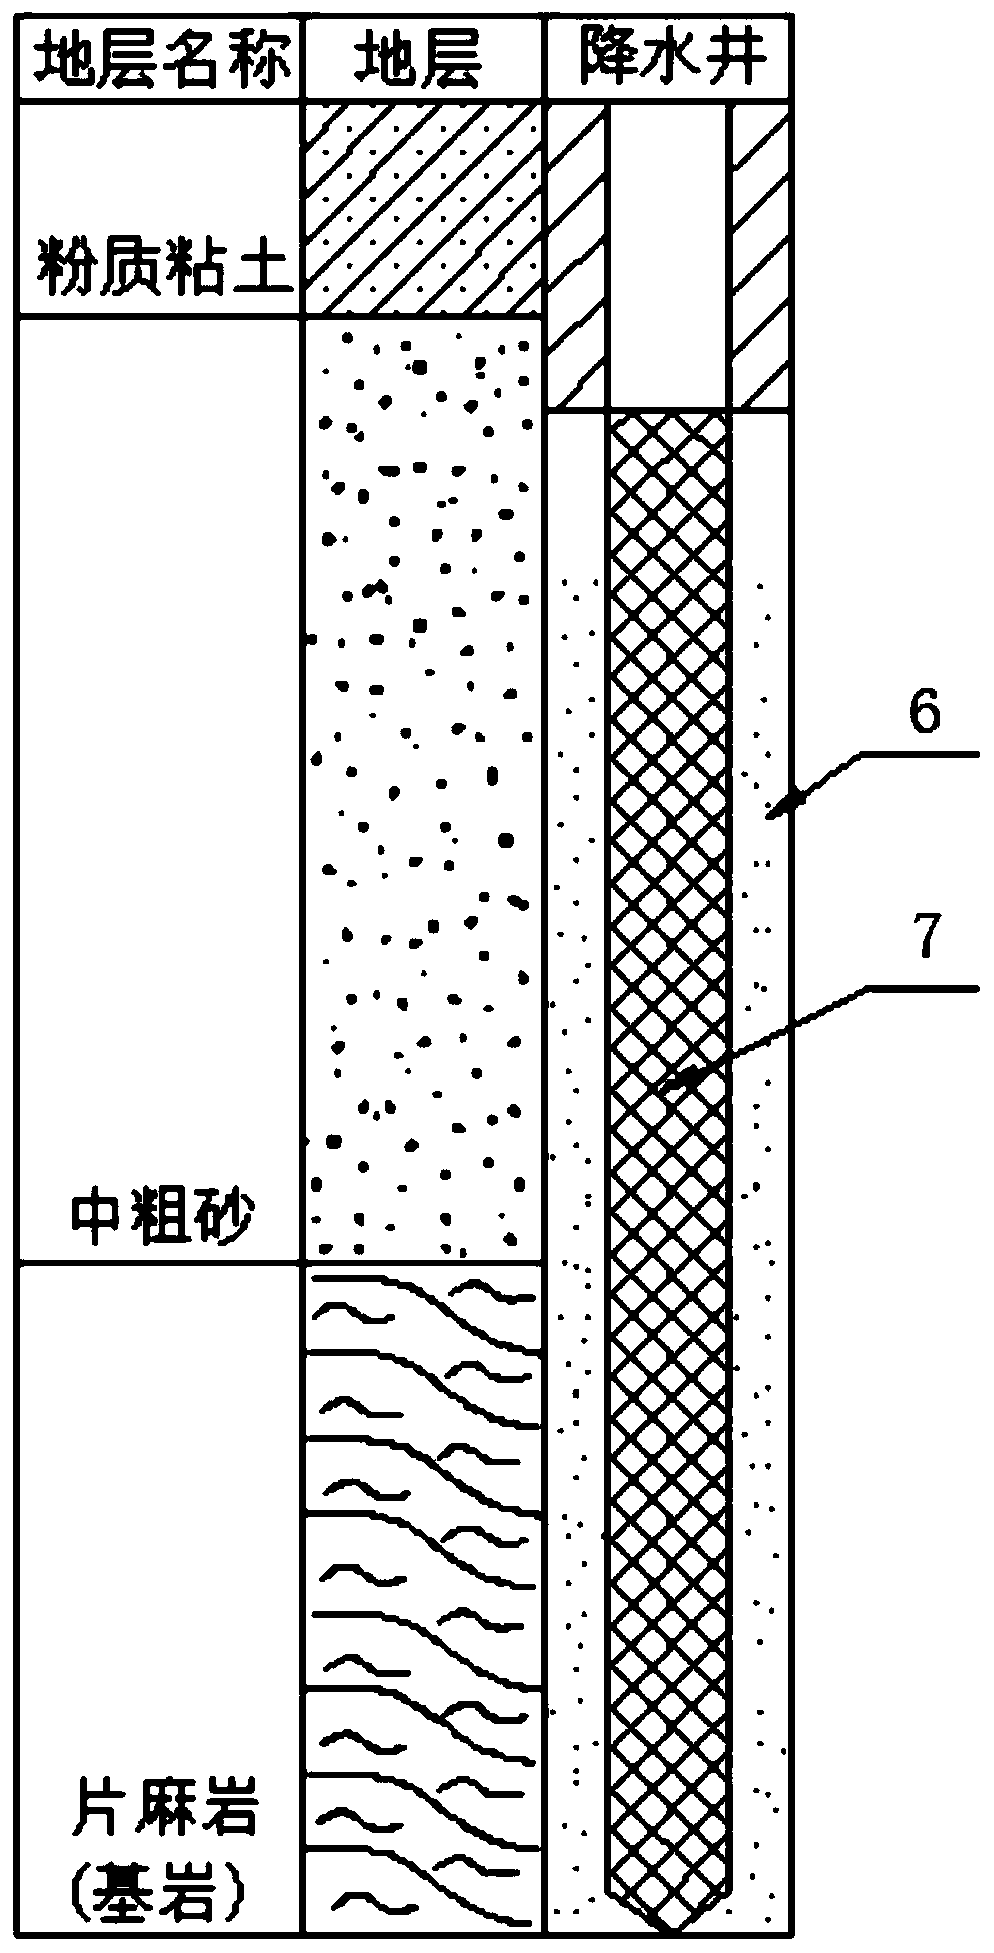 A follow-up high-efficiency water-stopping and sand-blocking precipitation composite system and its construction method